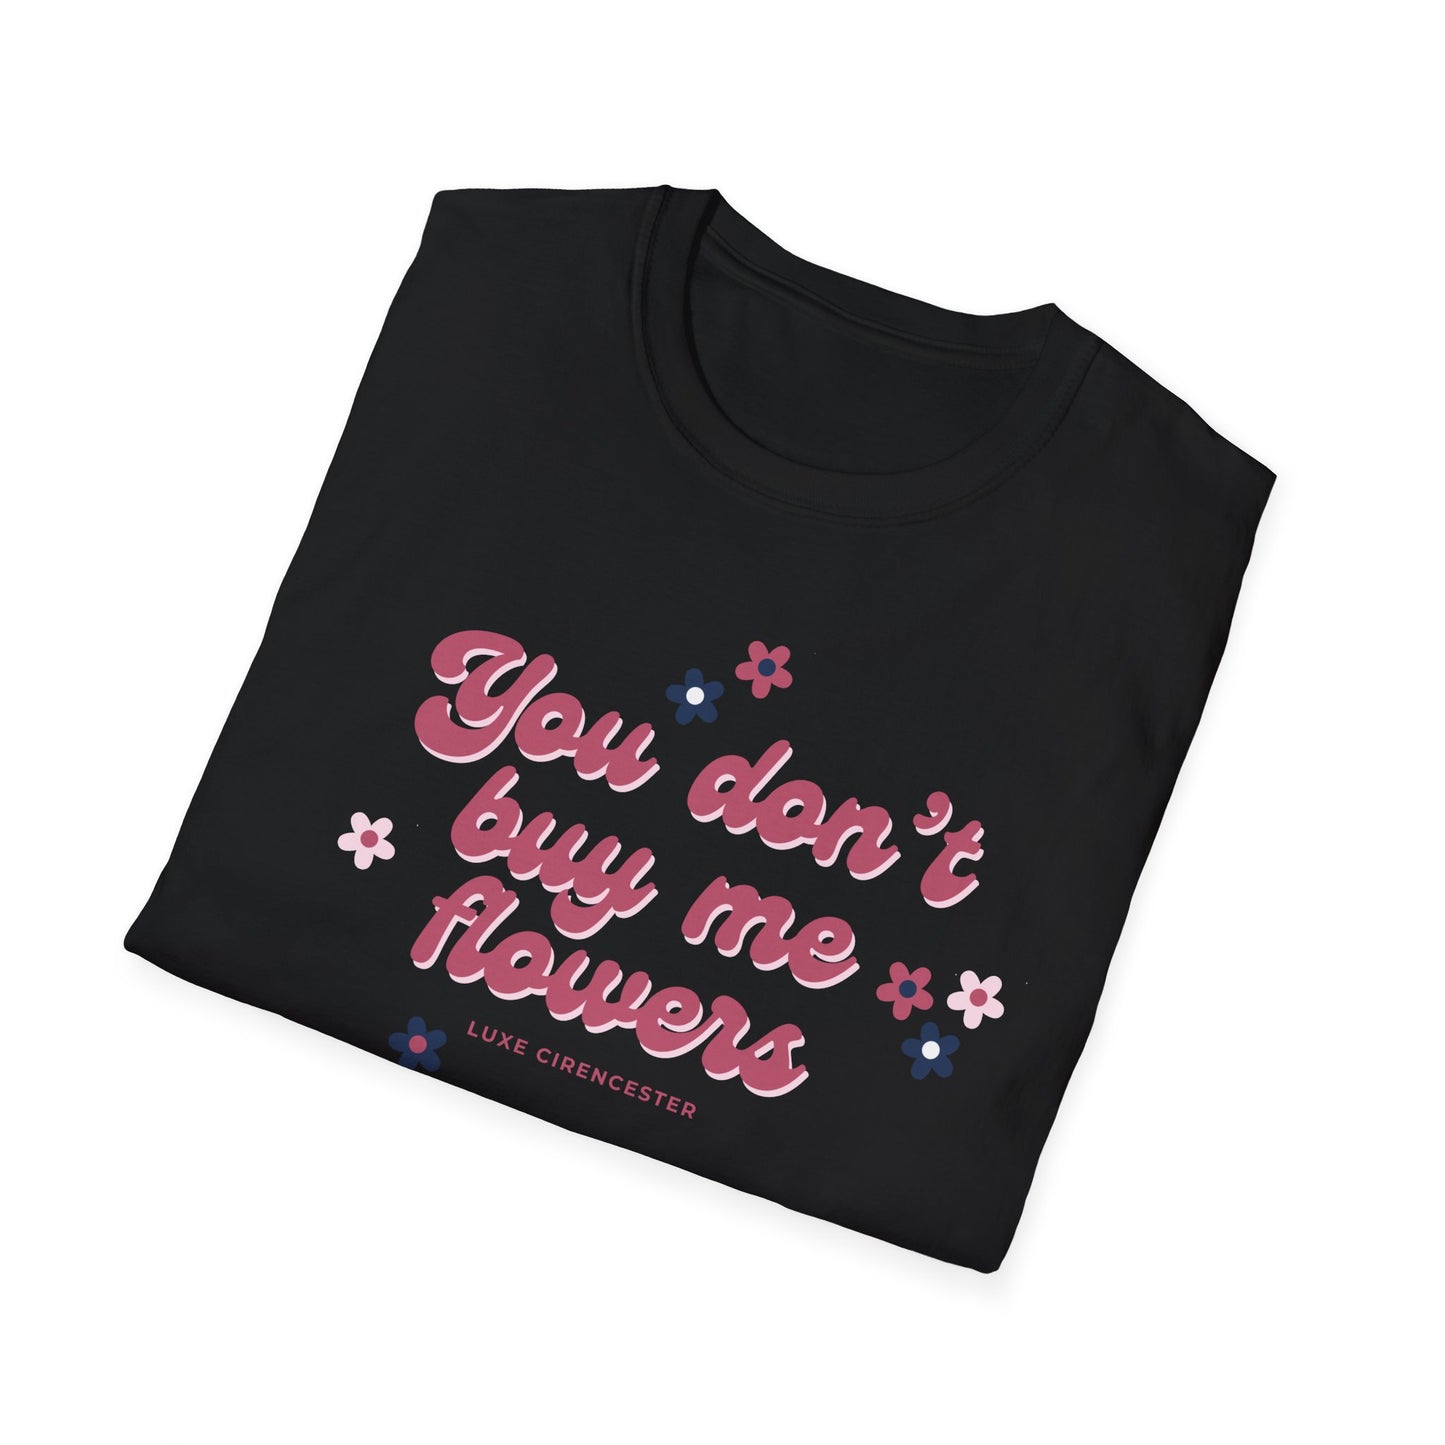 You Don't Buy Me Flowers T-Shirt